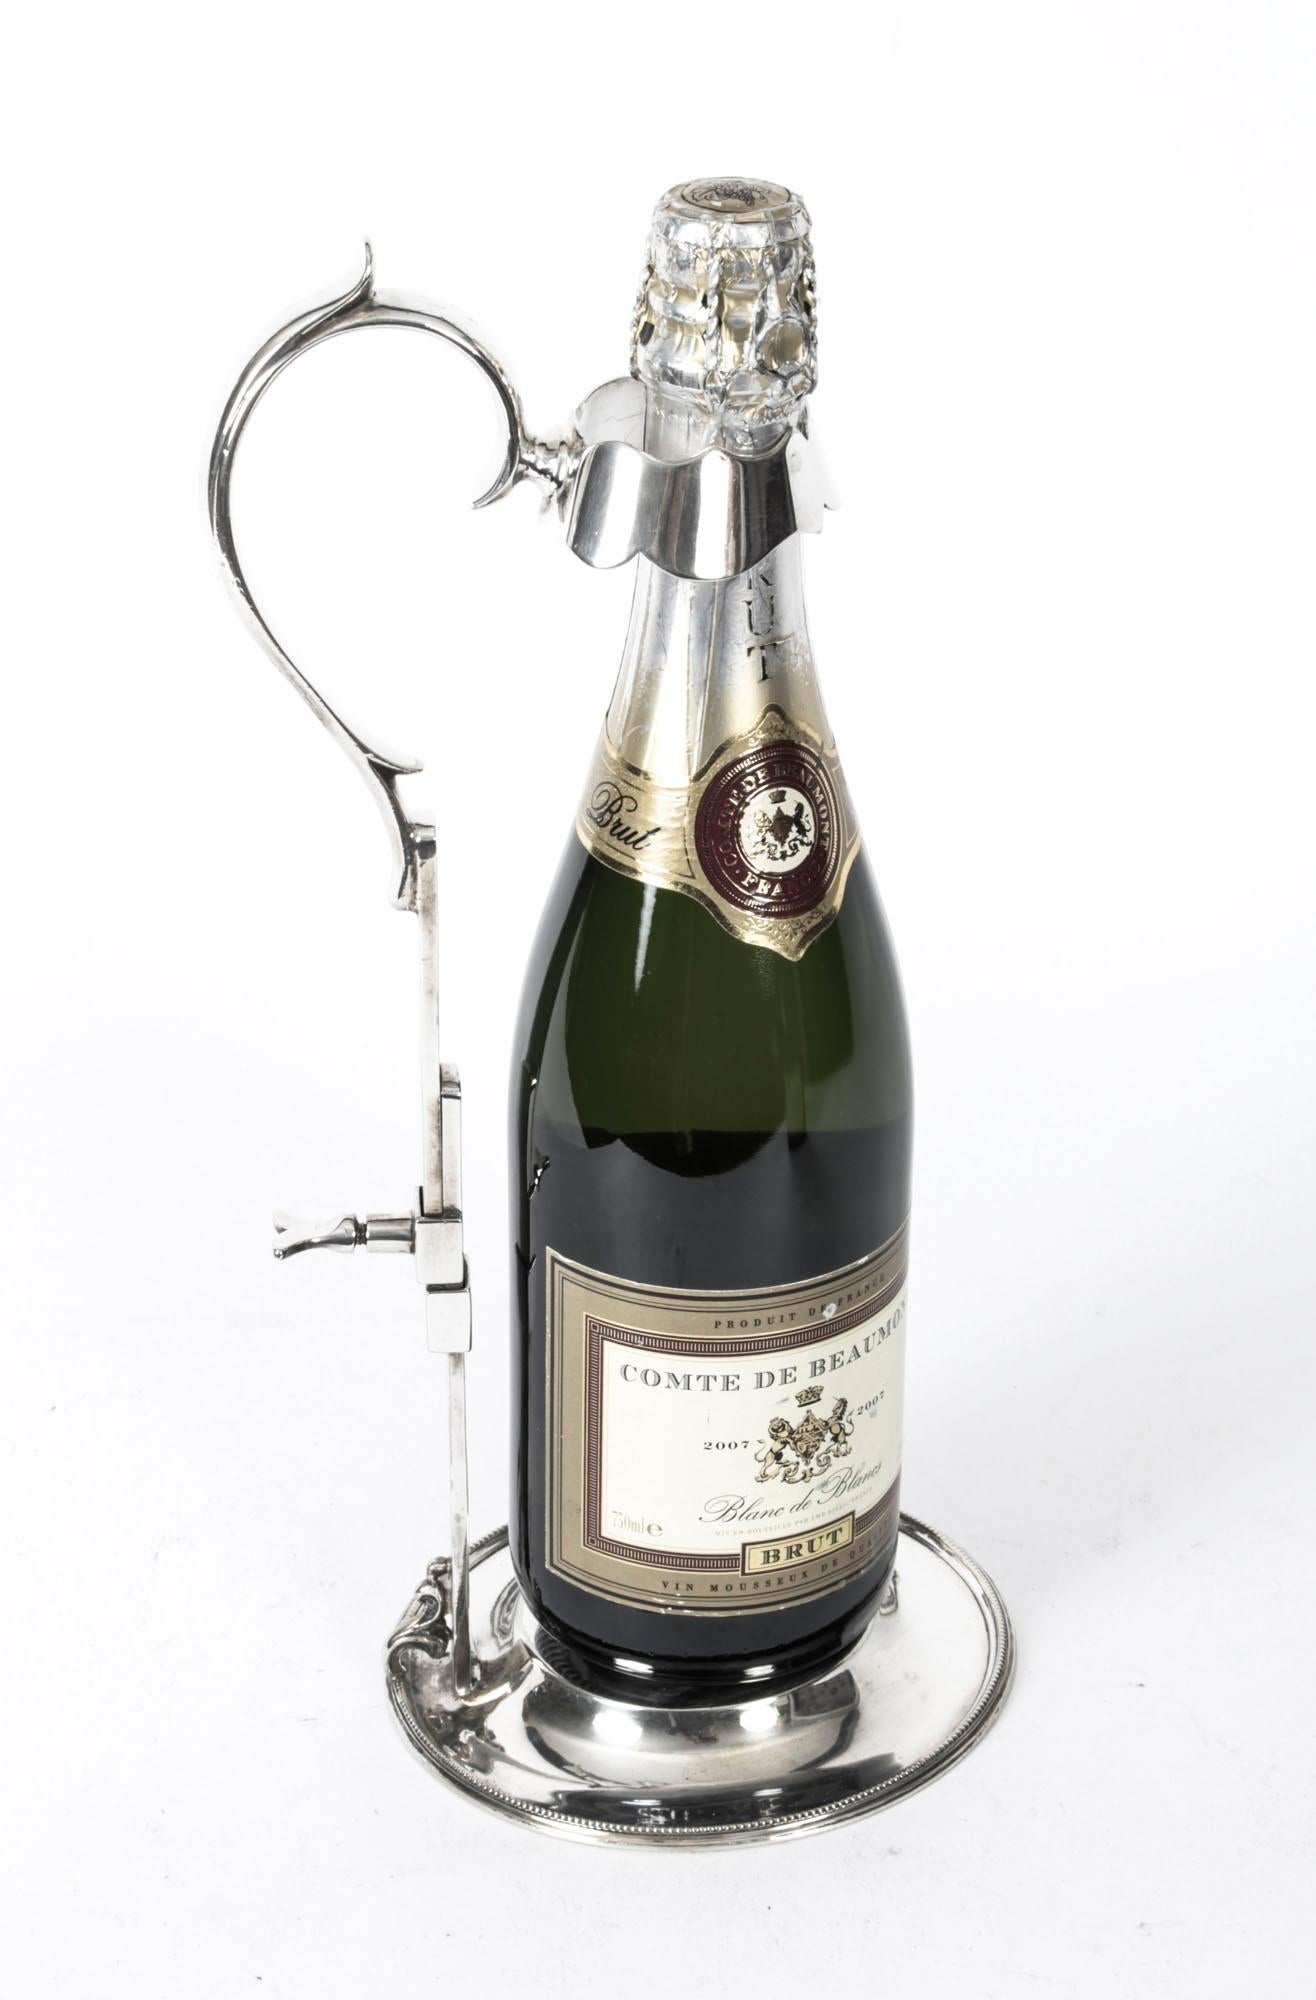 A very good quality late Victorian silver plated wine or Champagne pourer, by Walker & Hall, circa 1880 in date.

It features an extendable handle and butterfly screw locking mechanism.
handle and collar. The scroll handle leads down to a